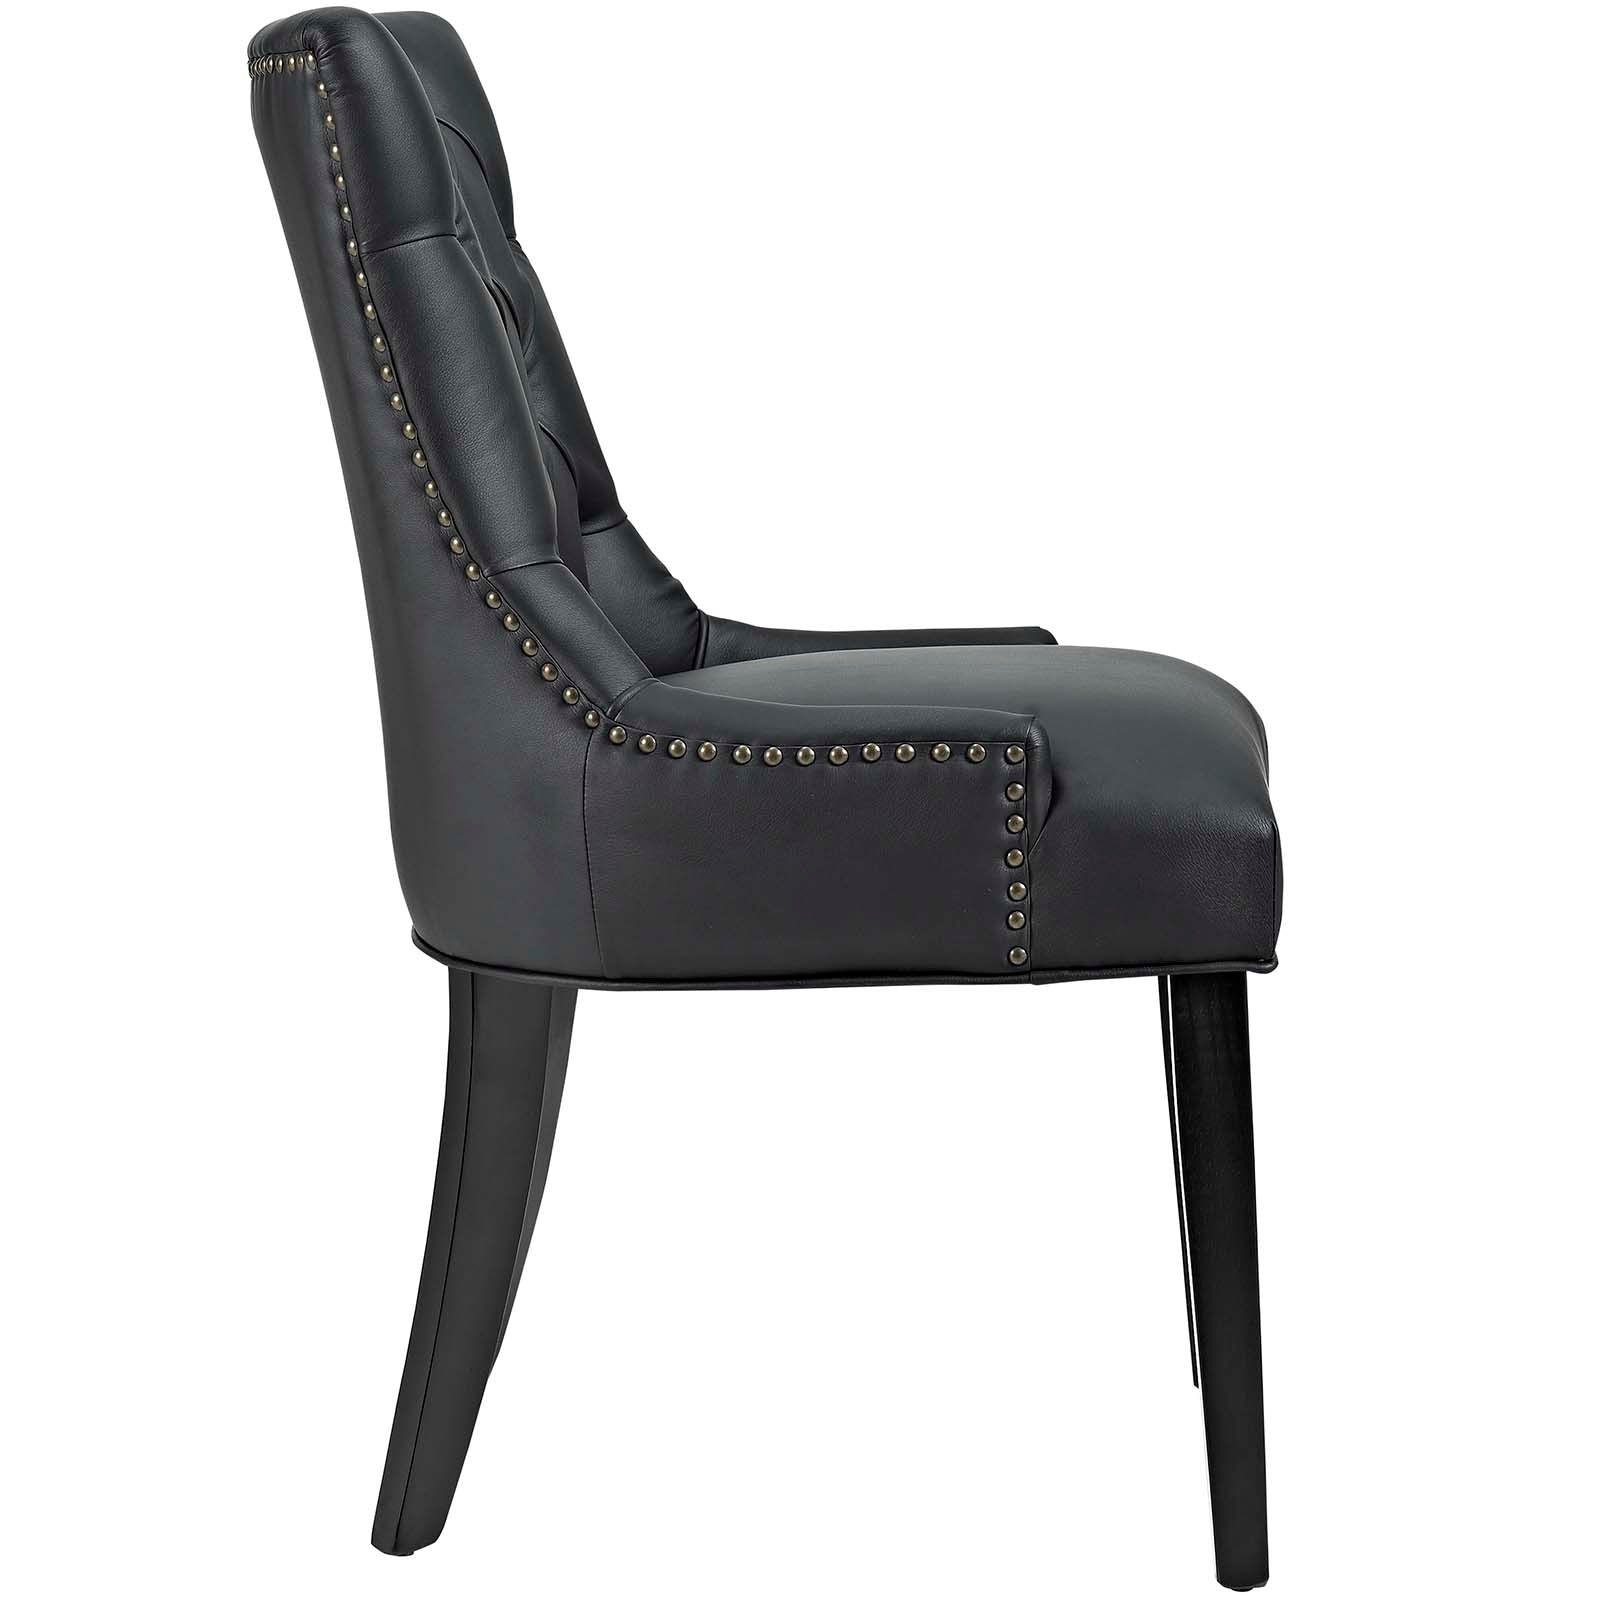 Modway Dining Chairs - Regent Tufted Faux Leather Dining Chair Black